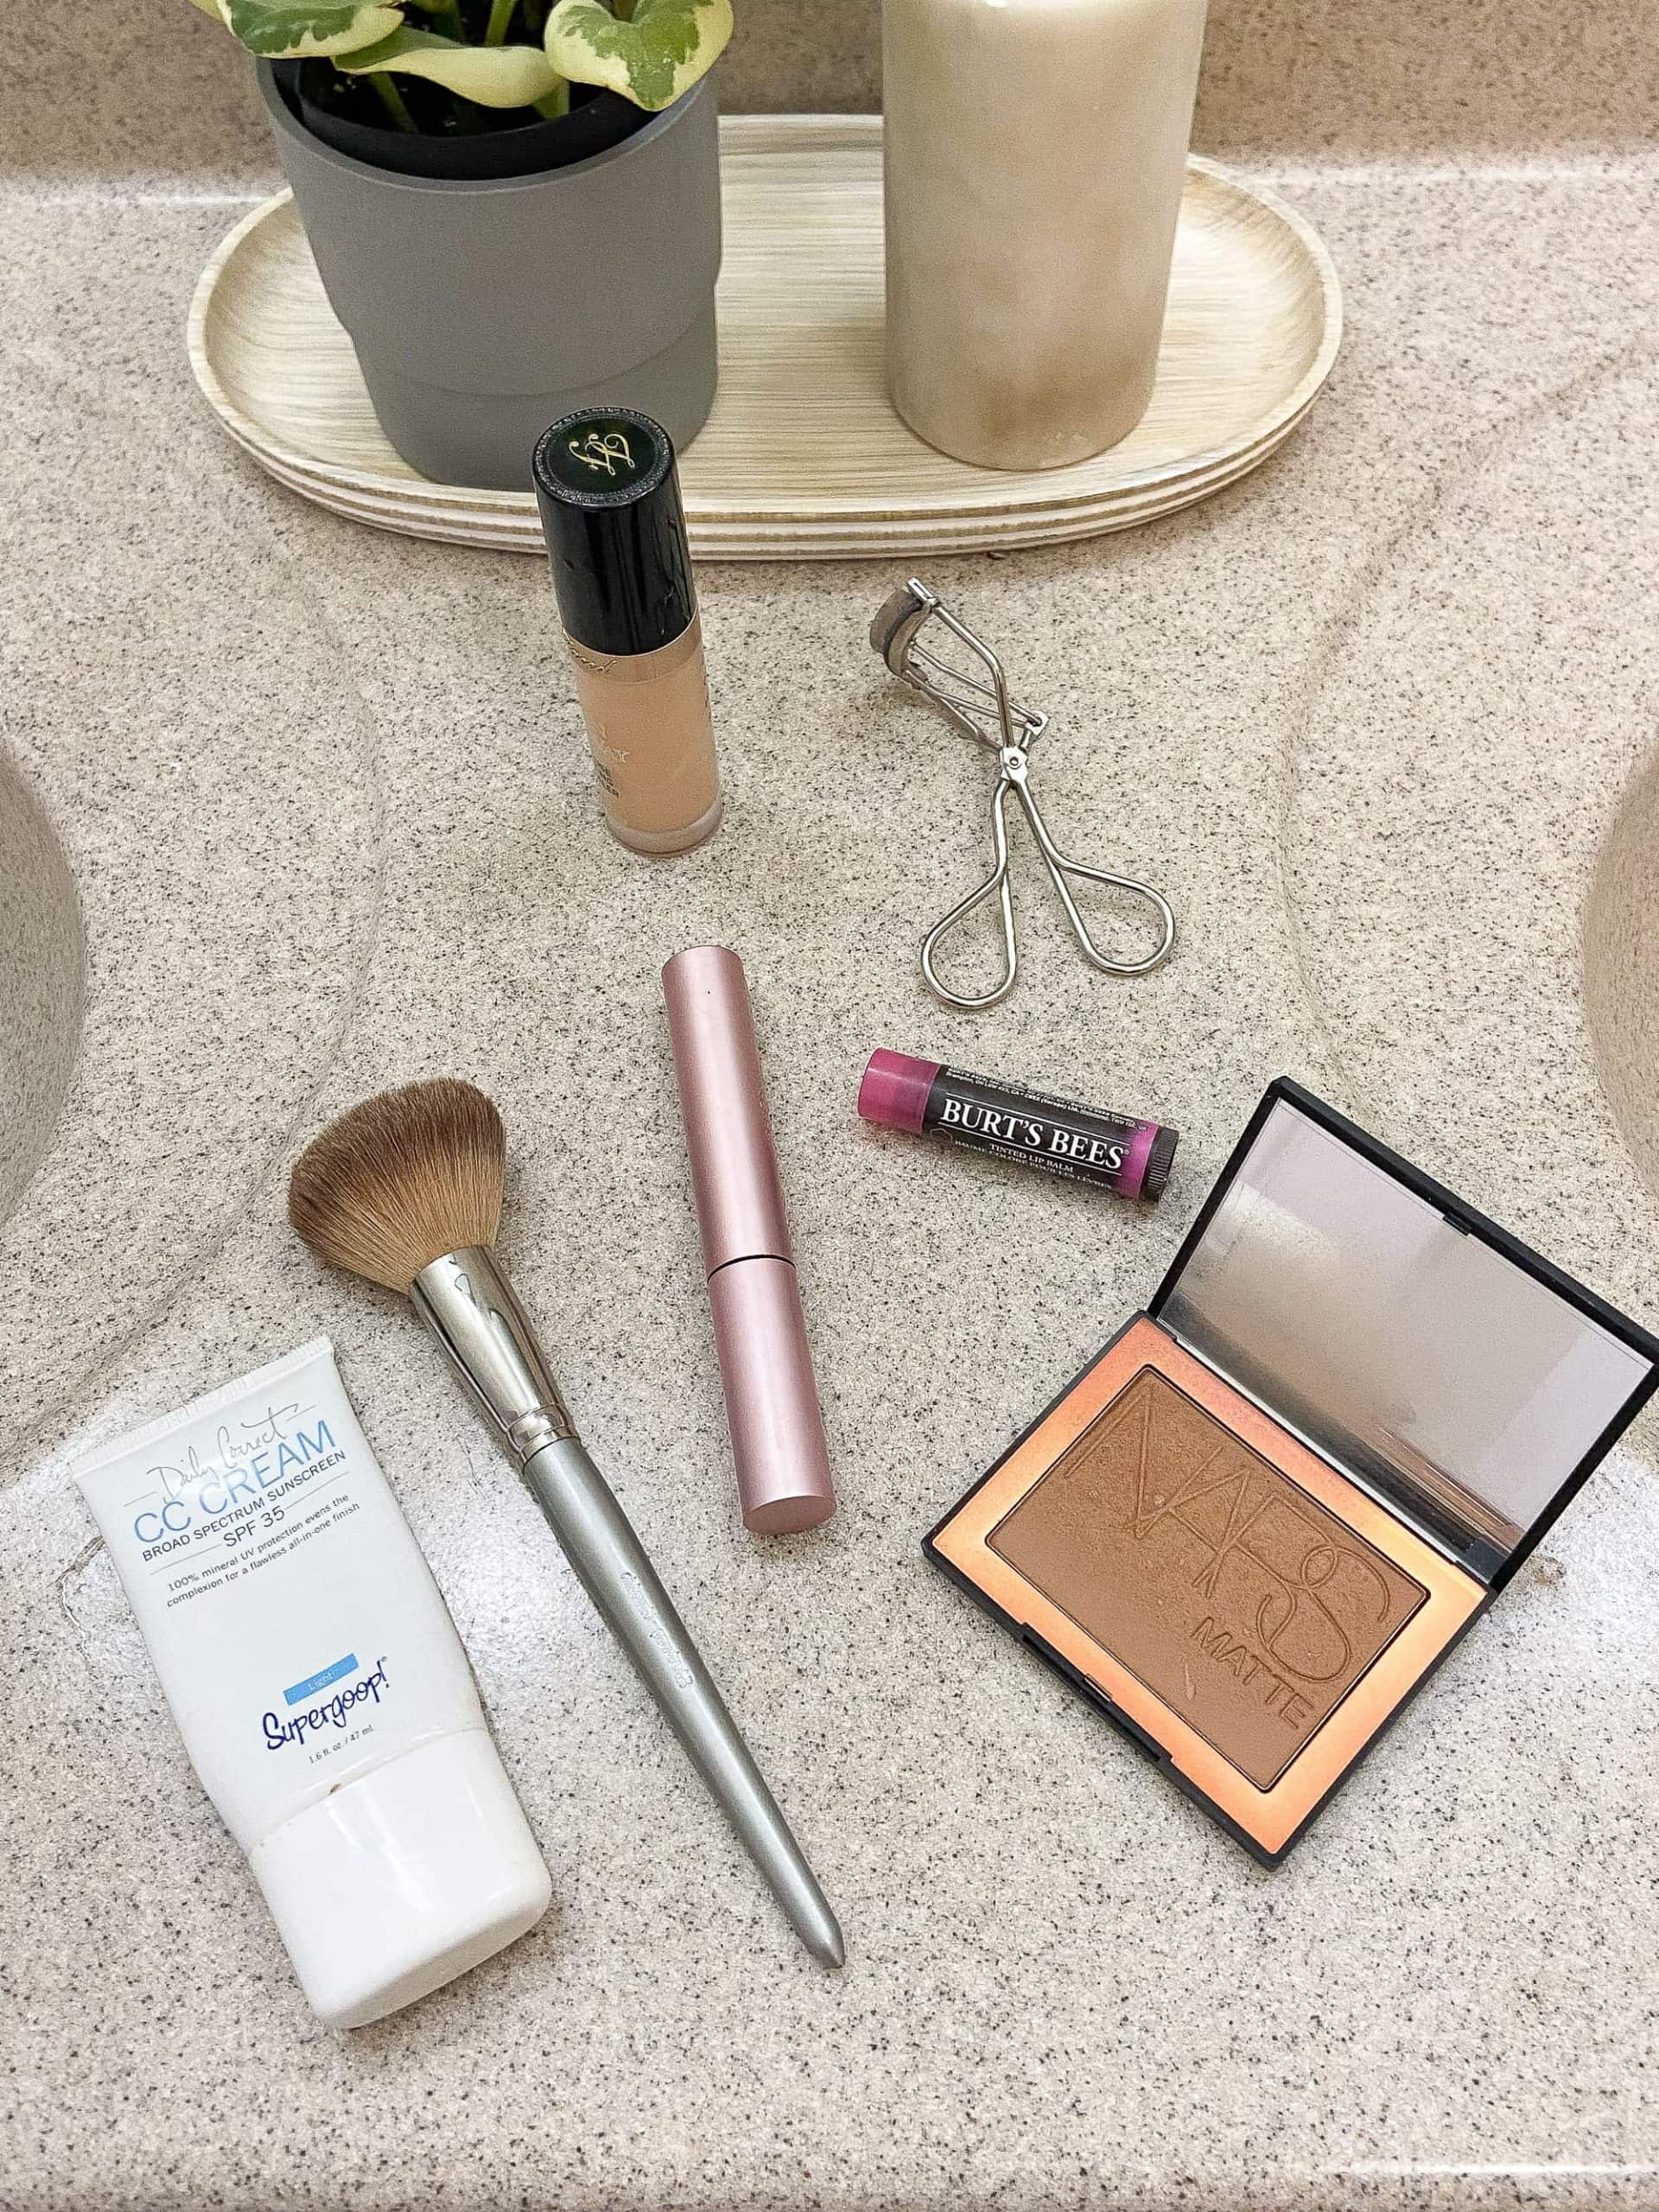 My simple makeup routine